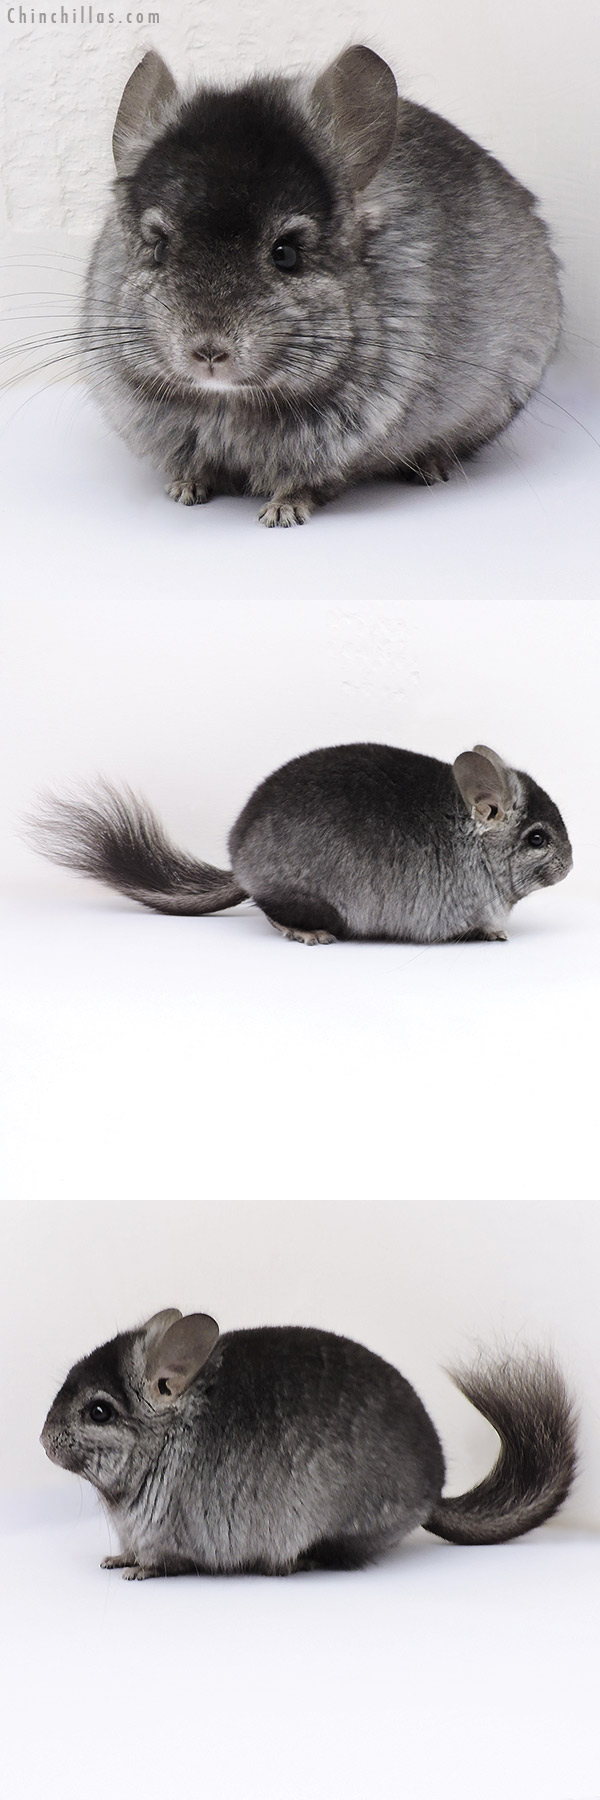 Chinchilla or related item offered for sale or export on Chinchillas.com - 17094 Hetero Ebony  Royal Persian Angora Male Chinchilla